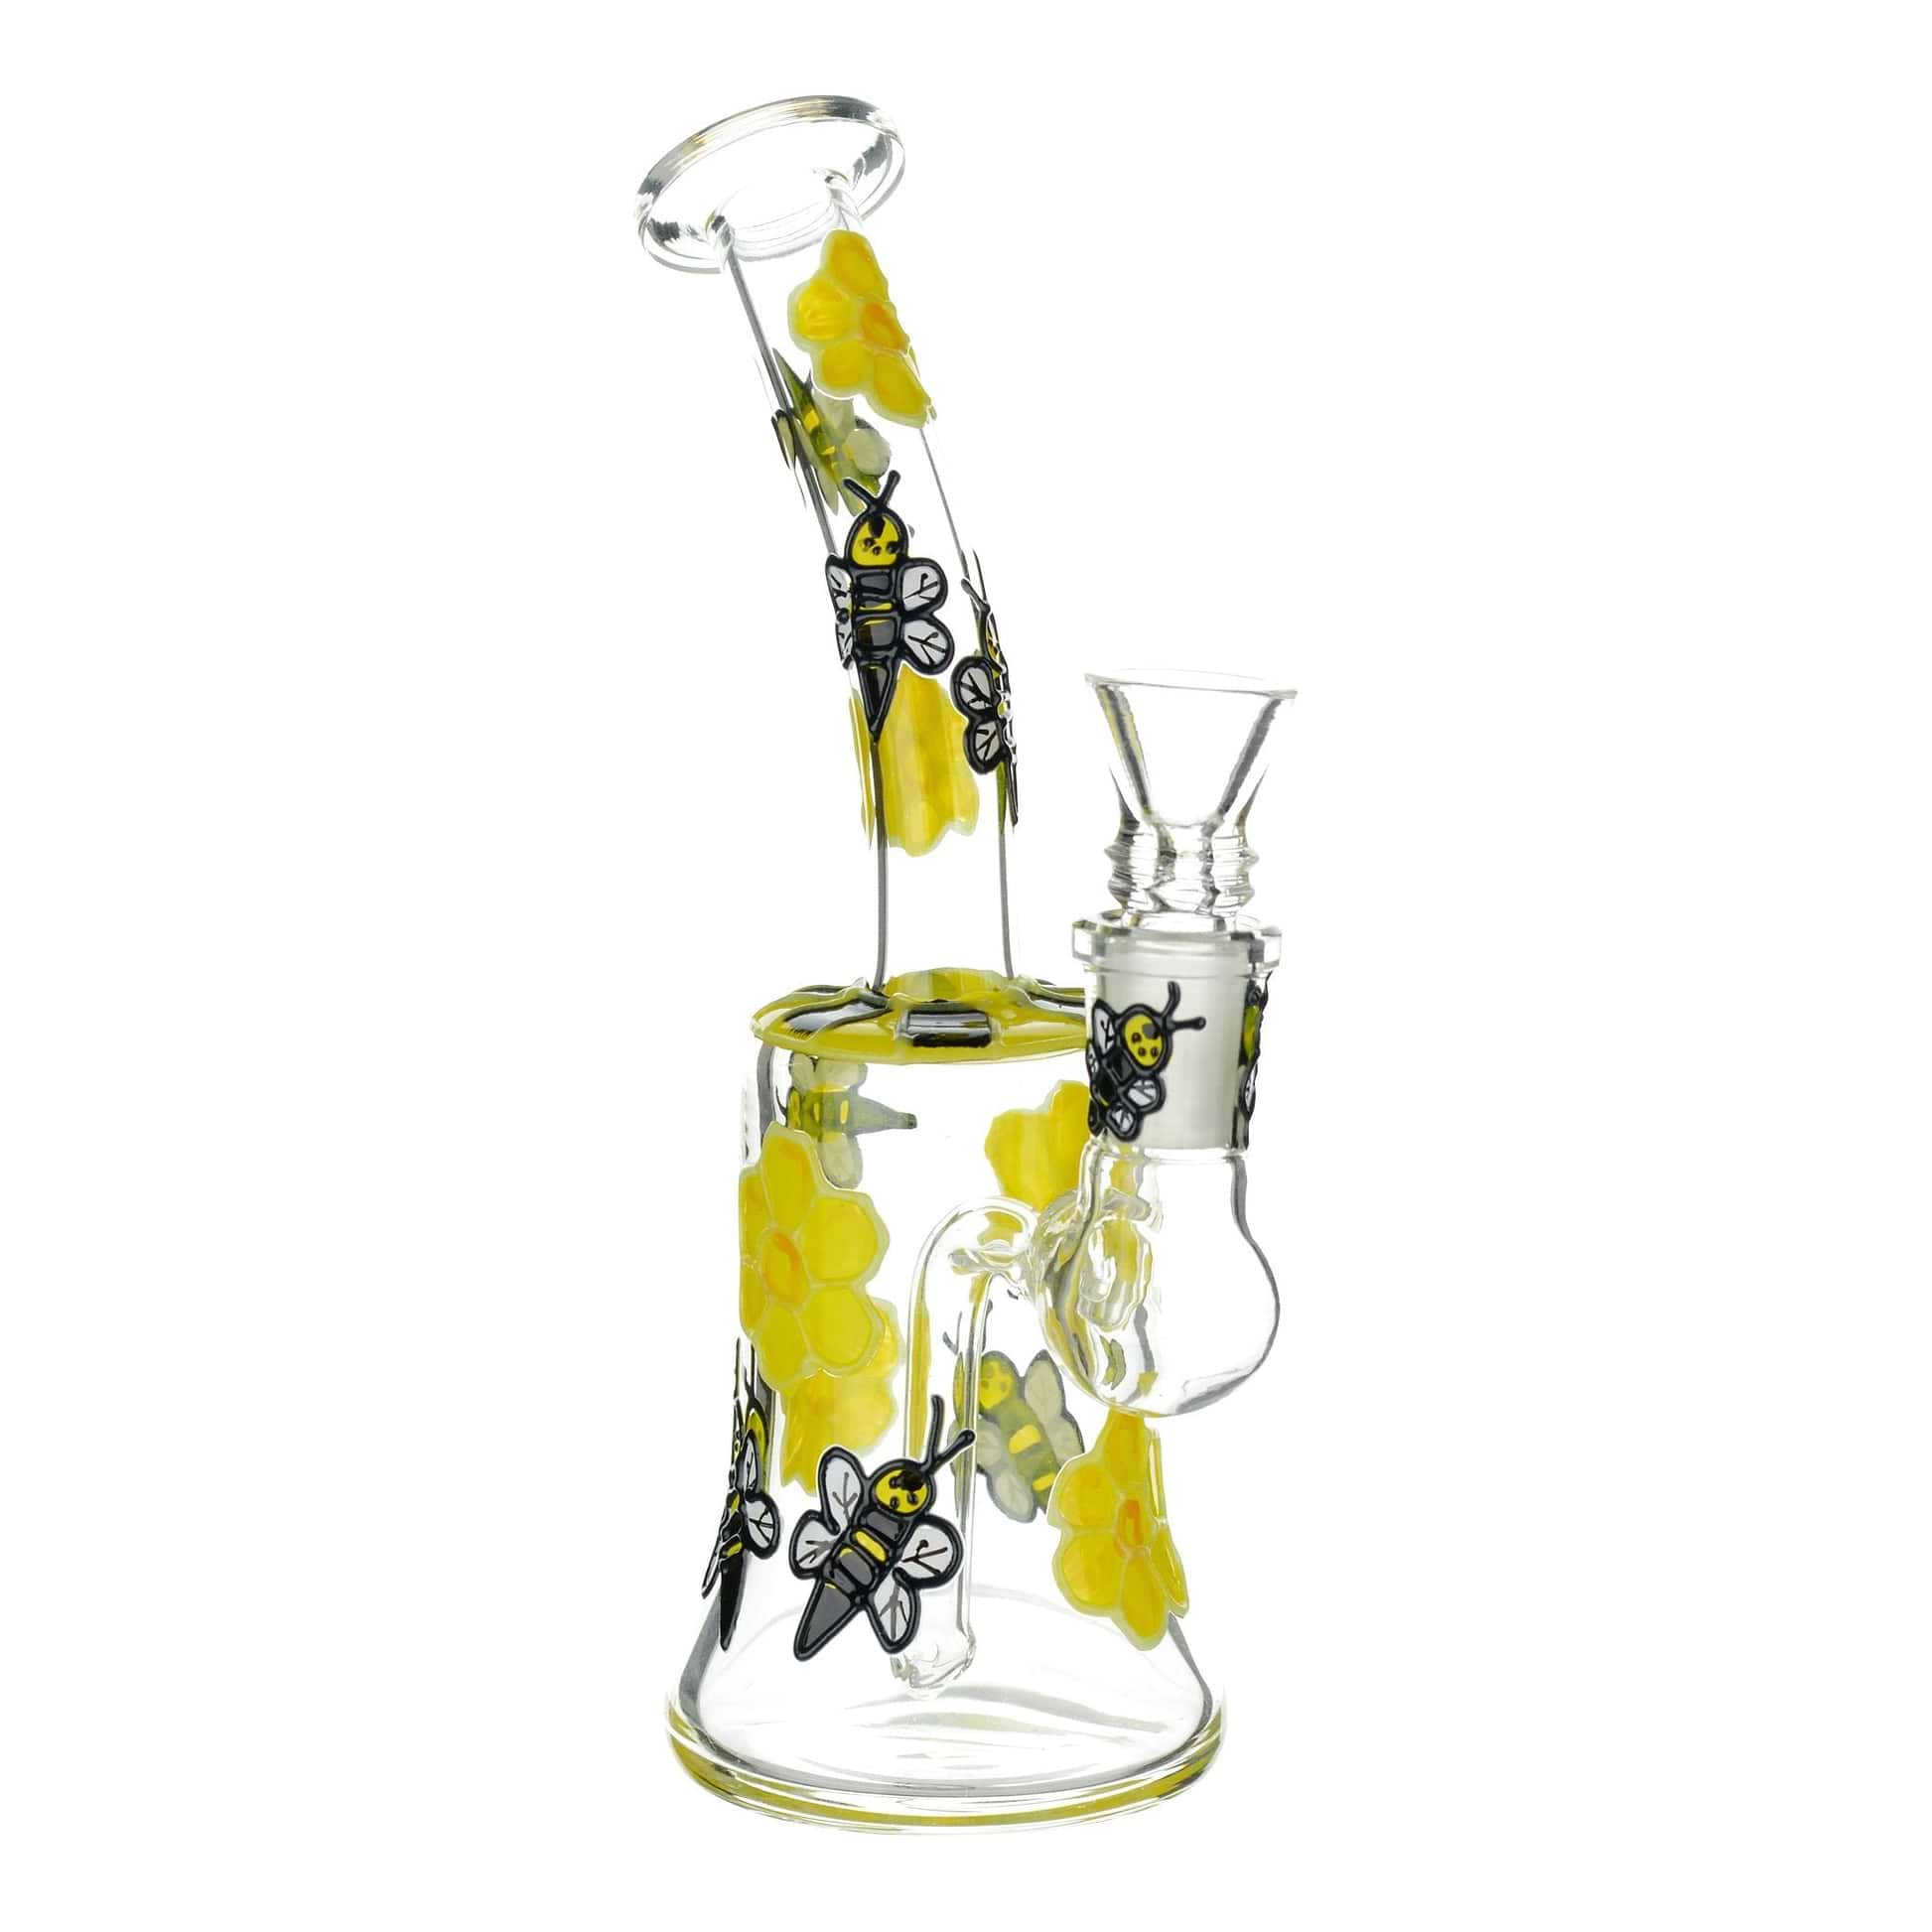 Full shot glass bong yellow flowers honeybee mouthpiece facing left bowl facing right opening visible